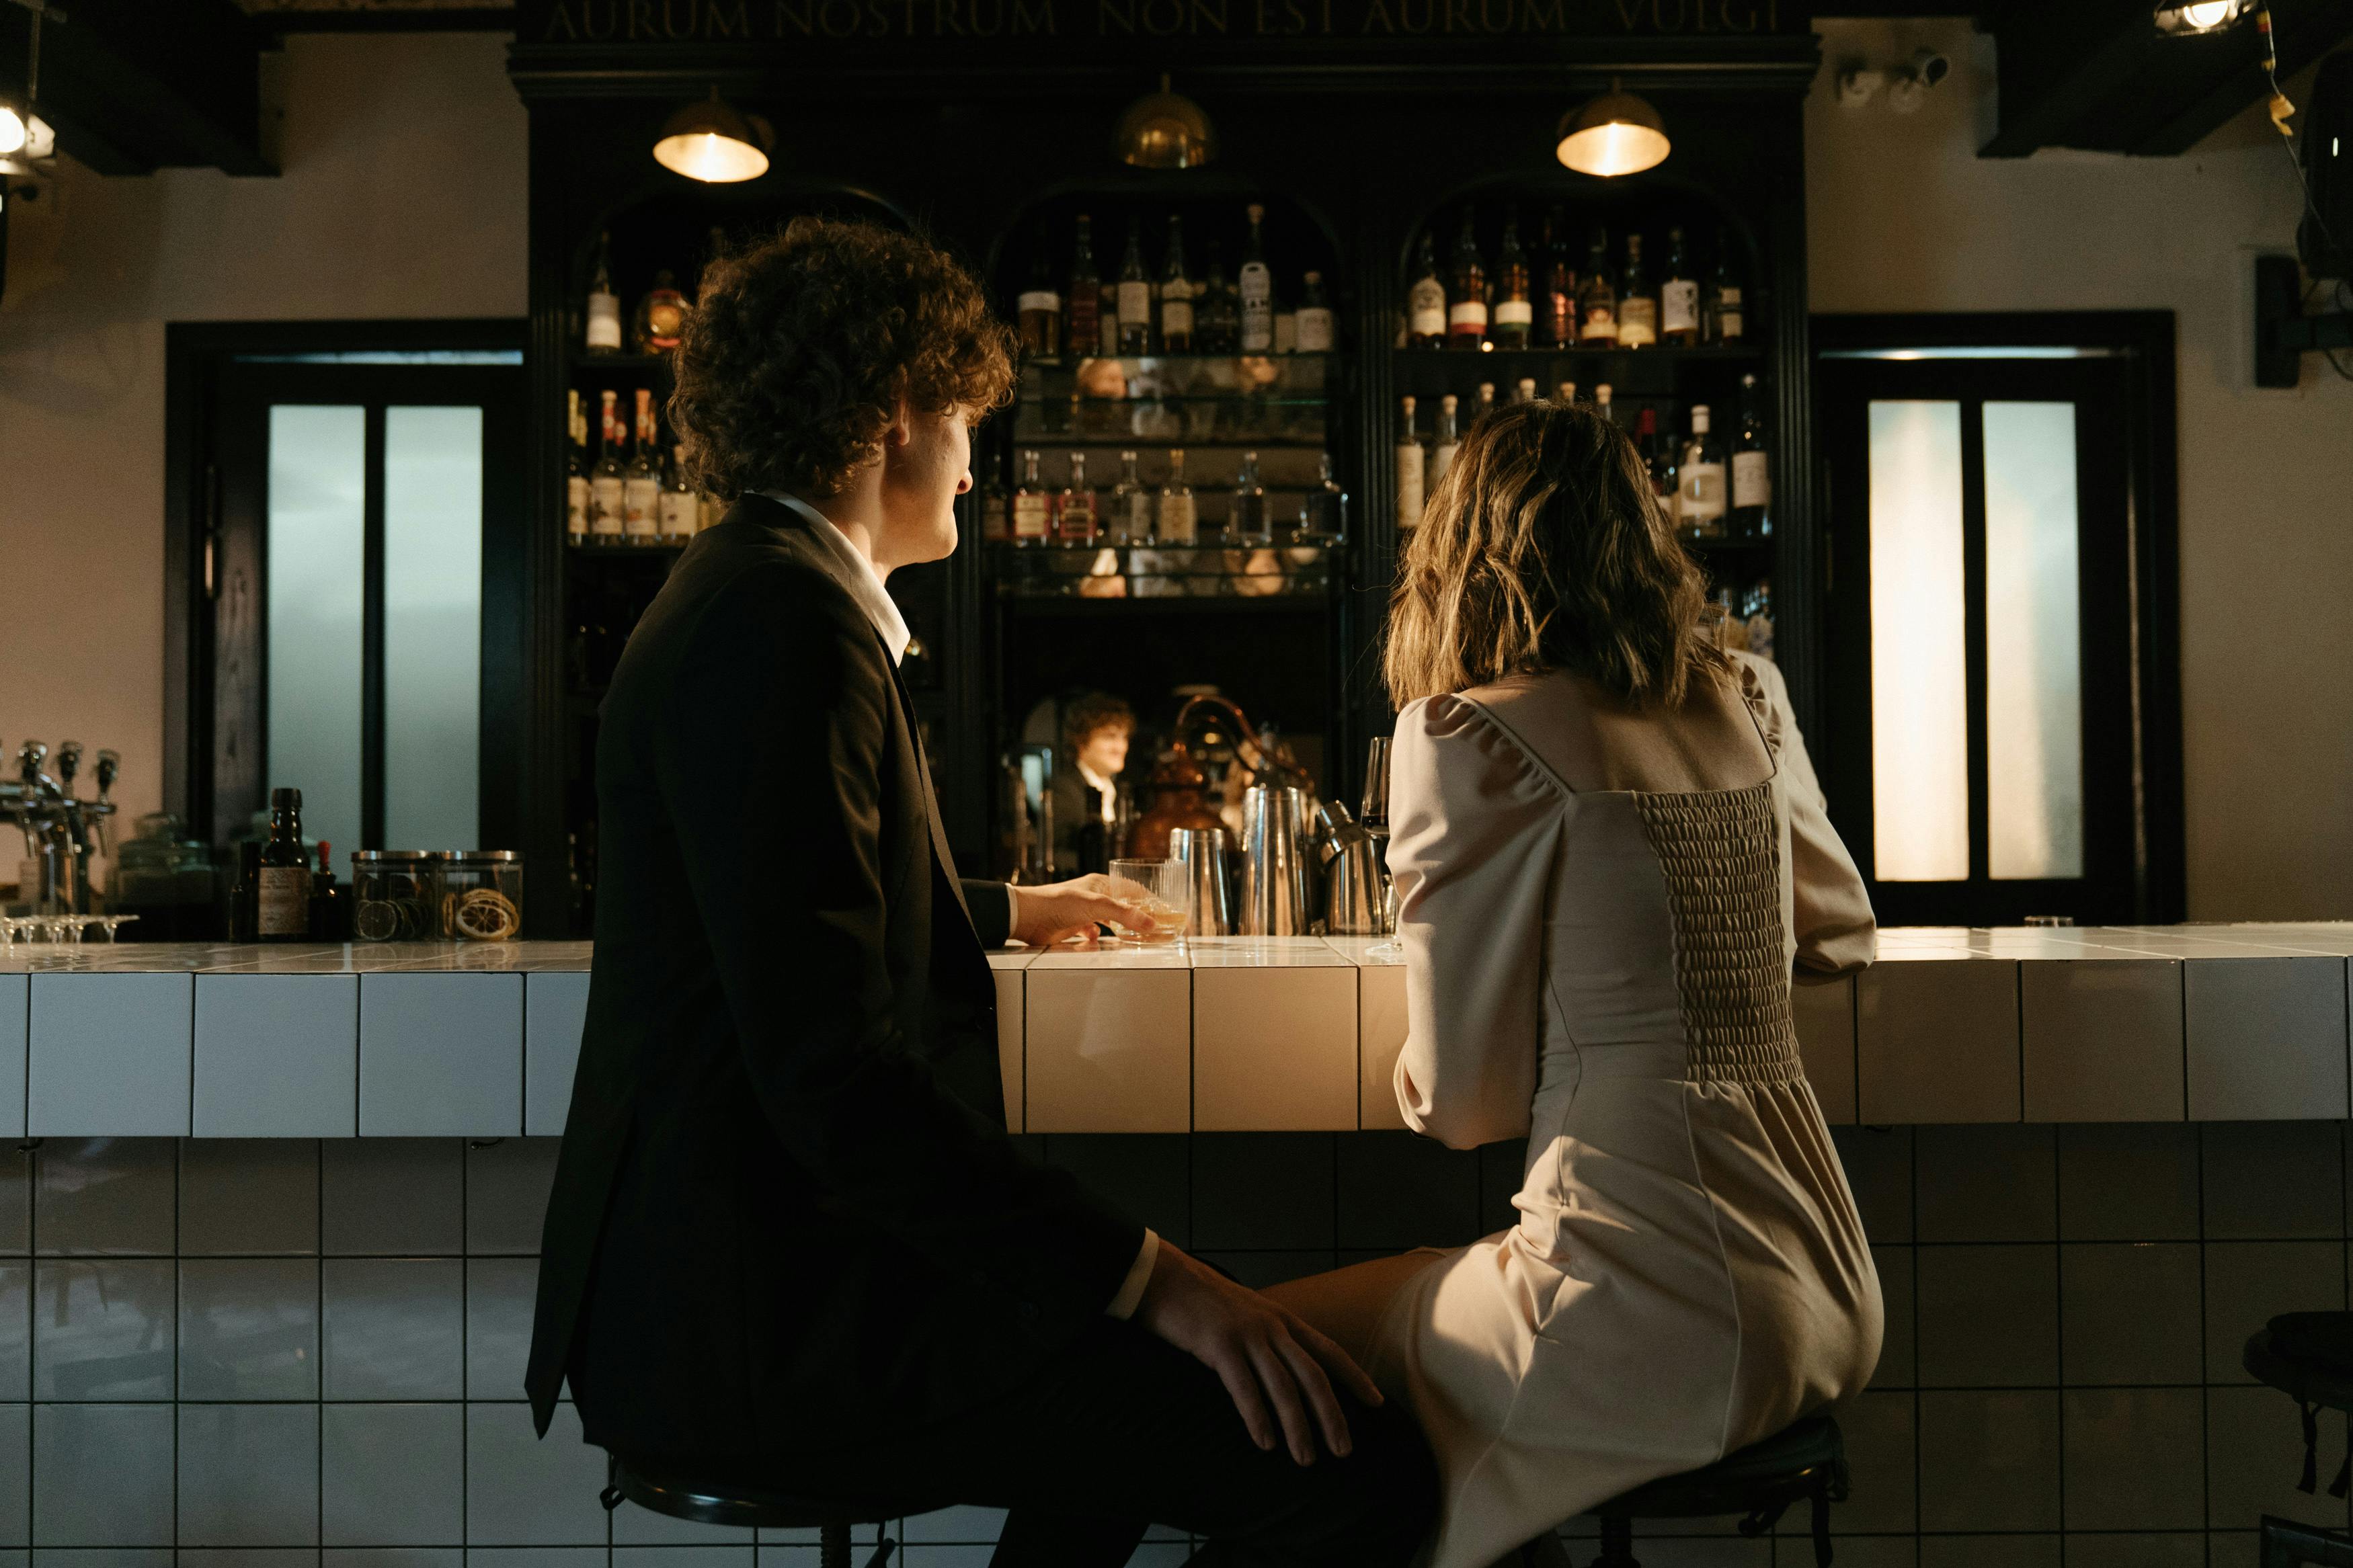 A couple on a date at a bar | Source: Pexels